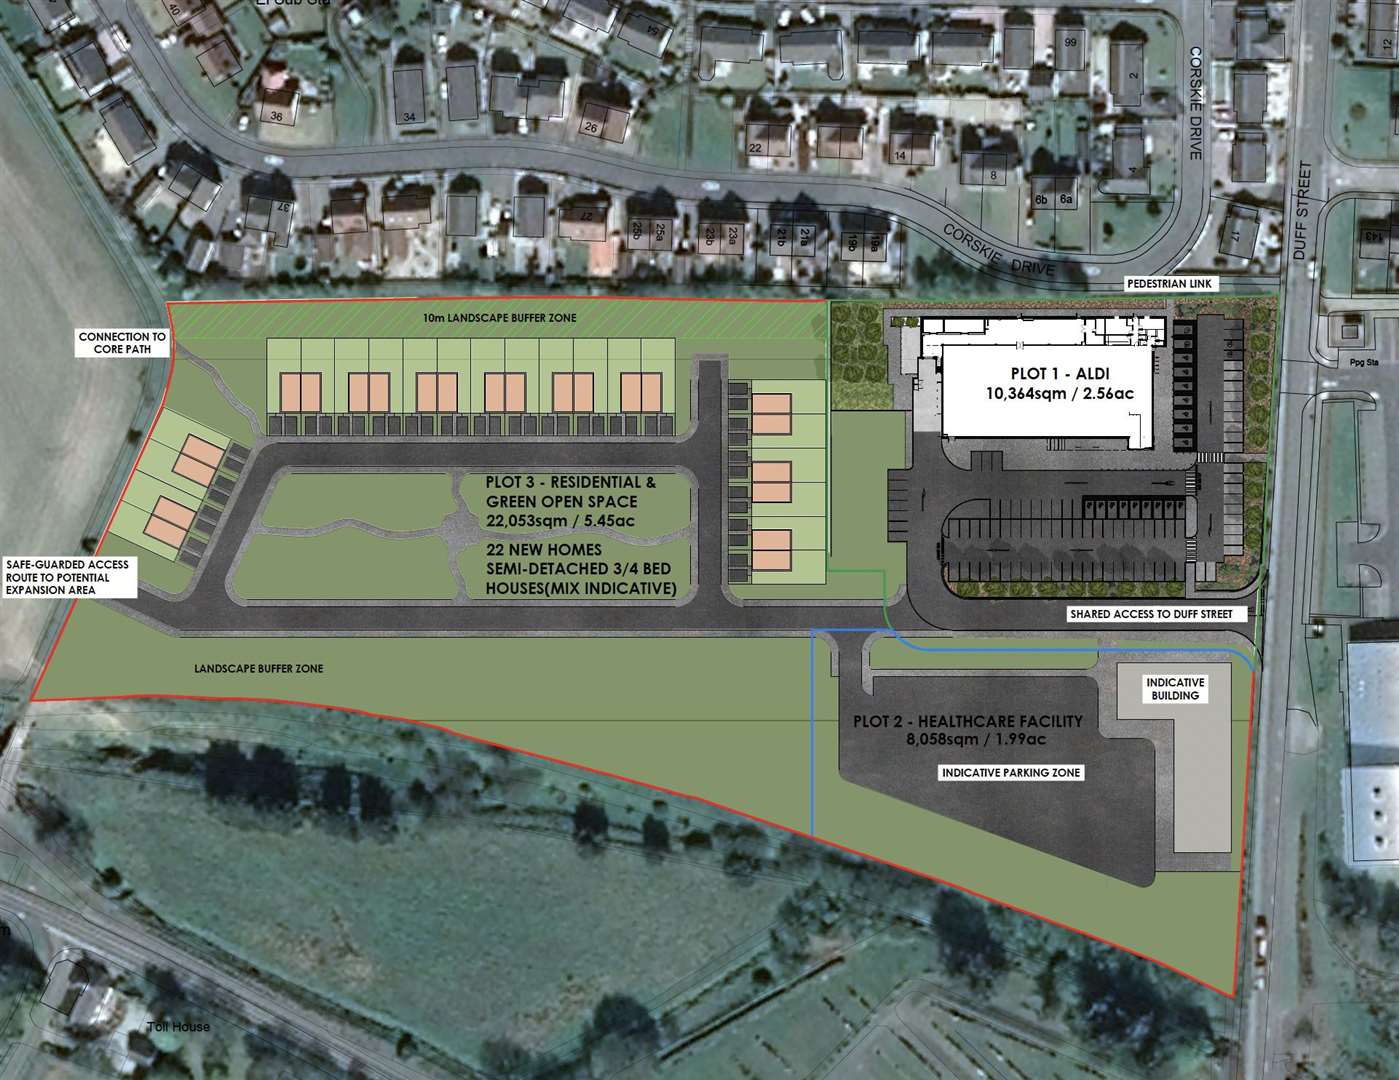 The Macduff site masterplan will be determined by councillors.